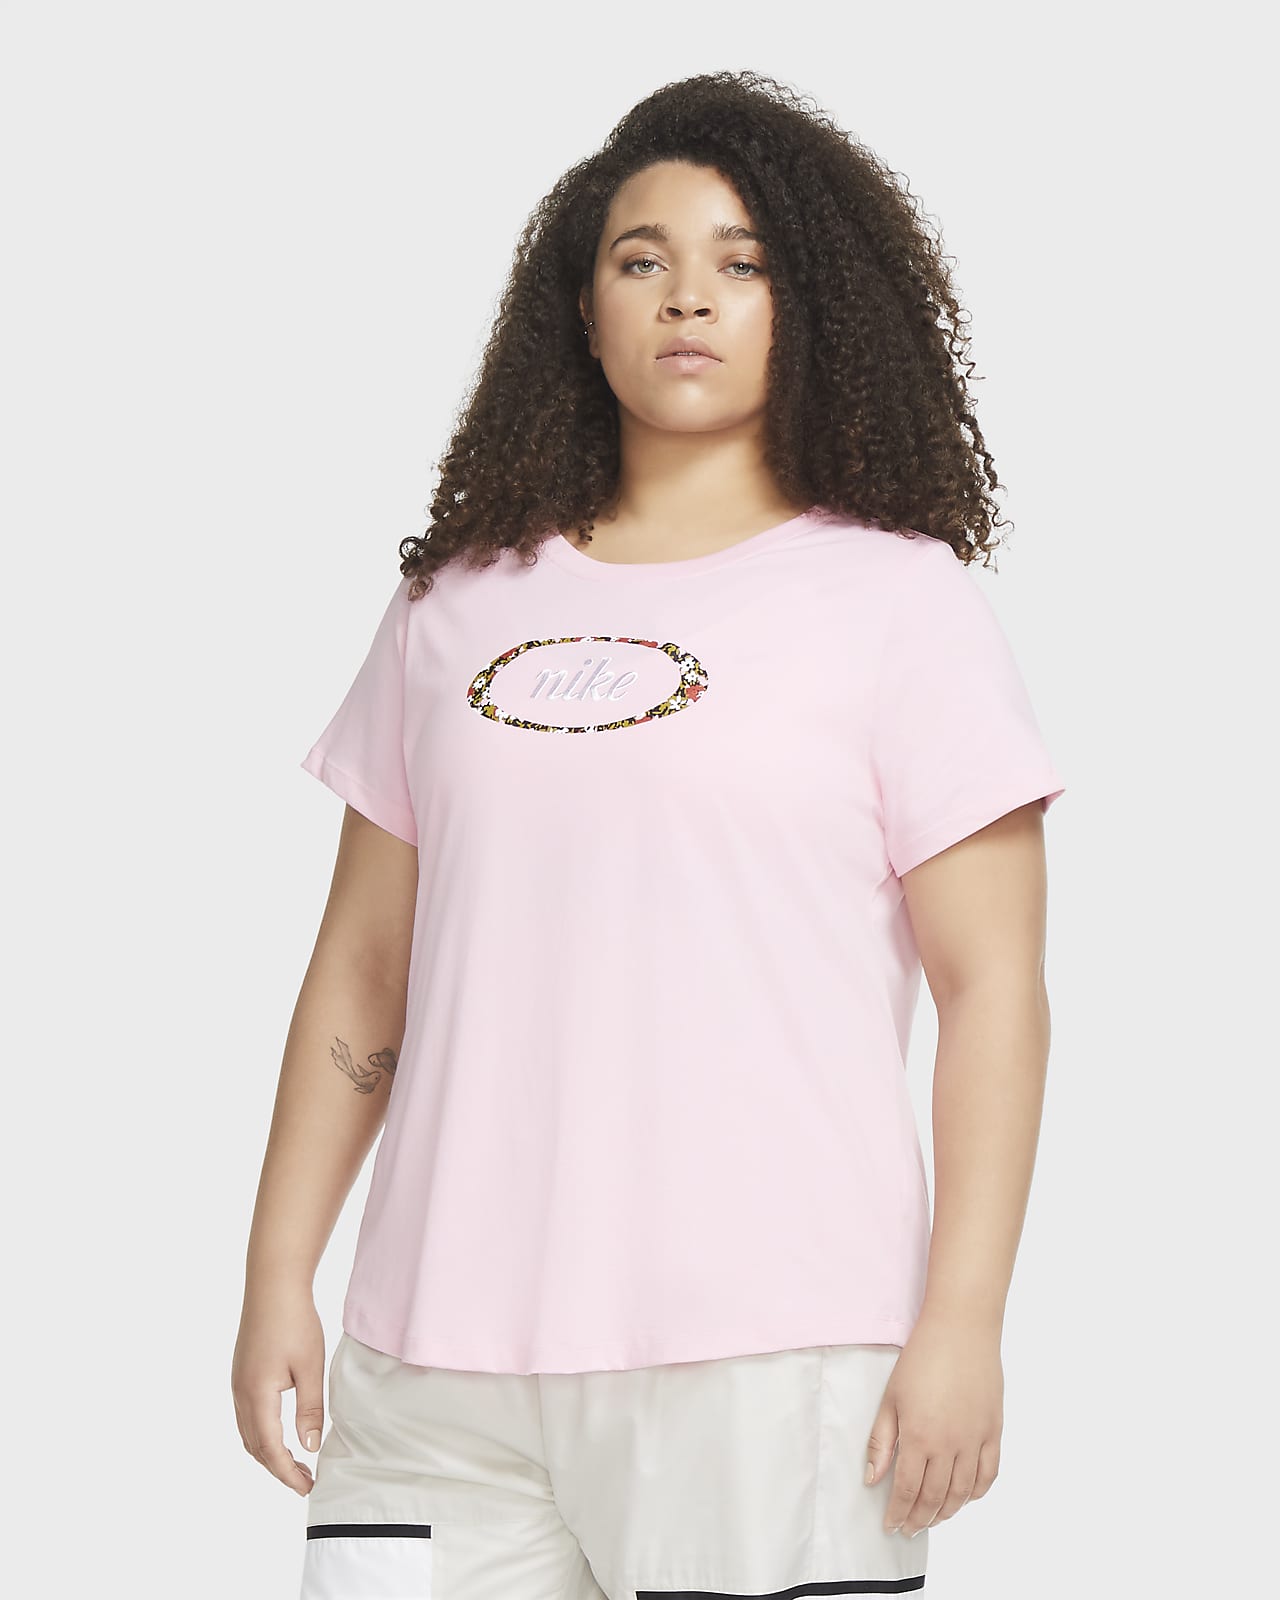 plus size nike clothes for women